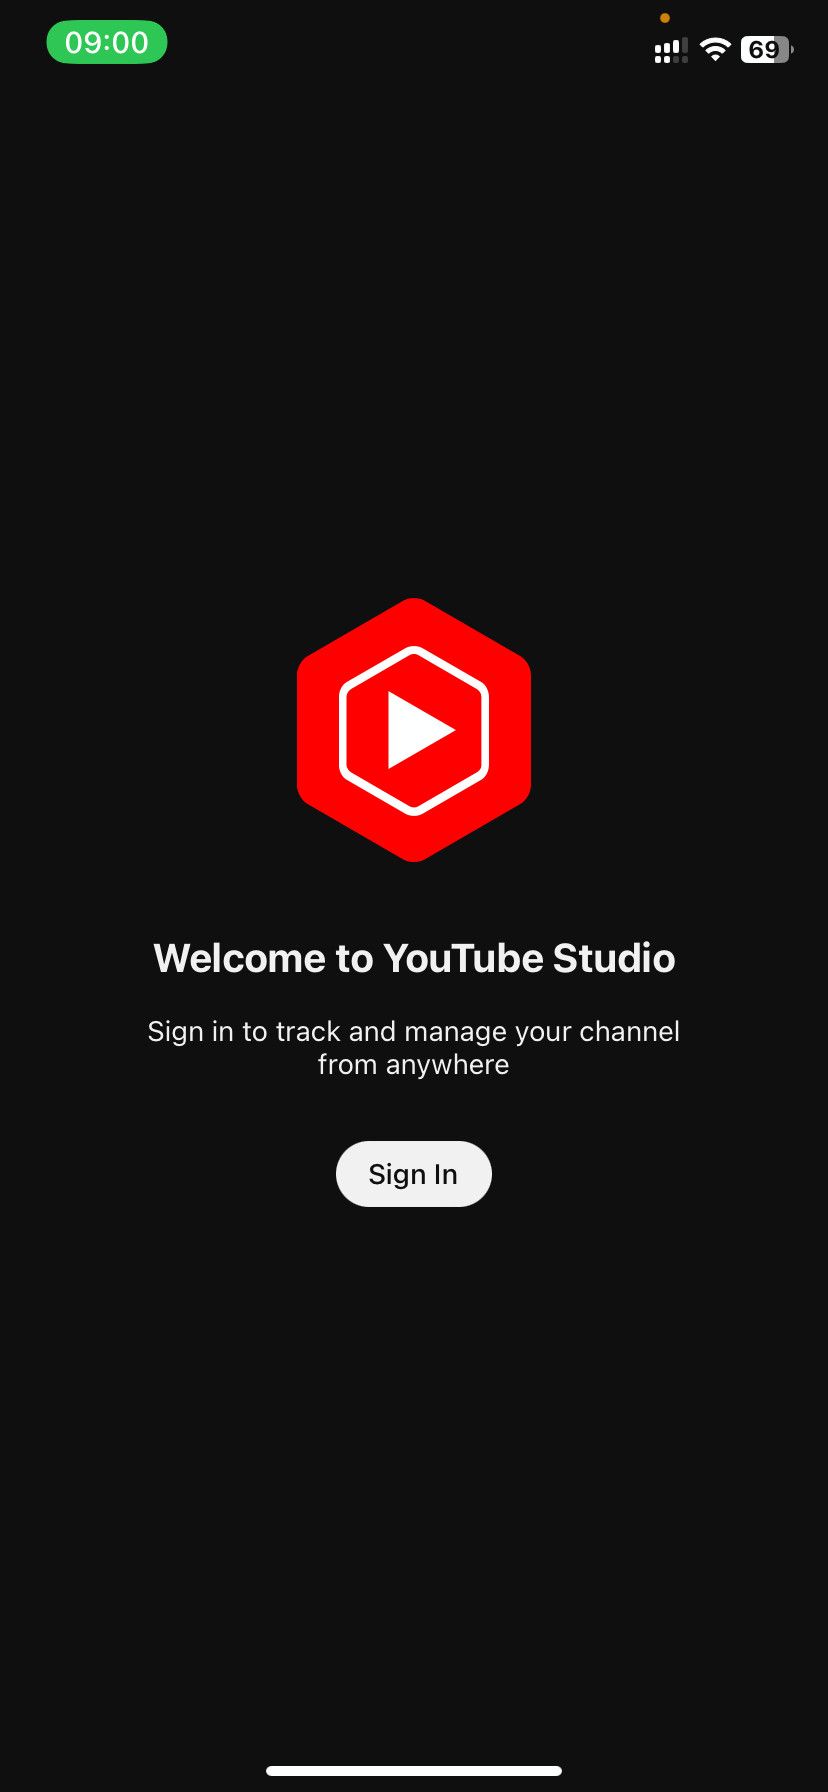 YouTube Studio Sign in page